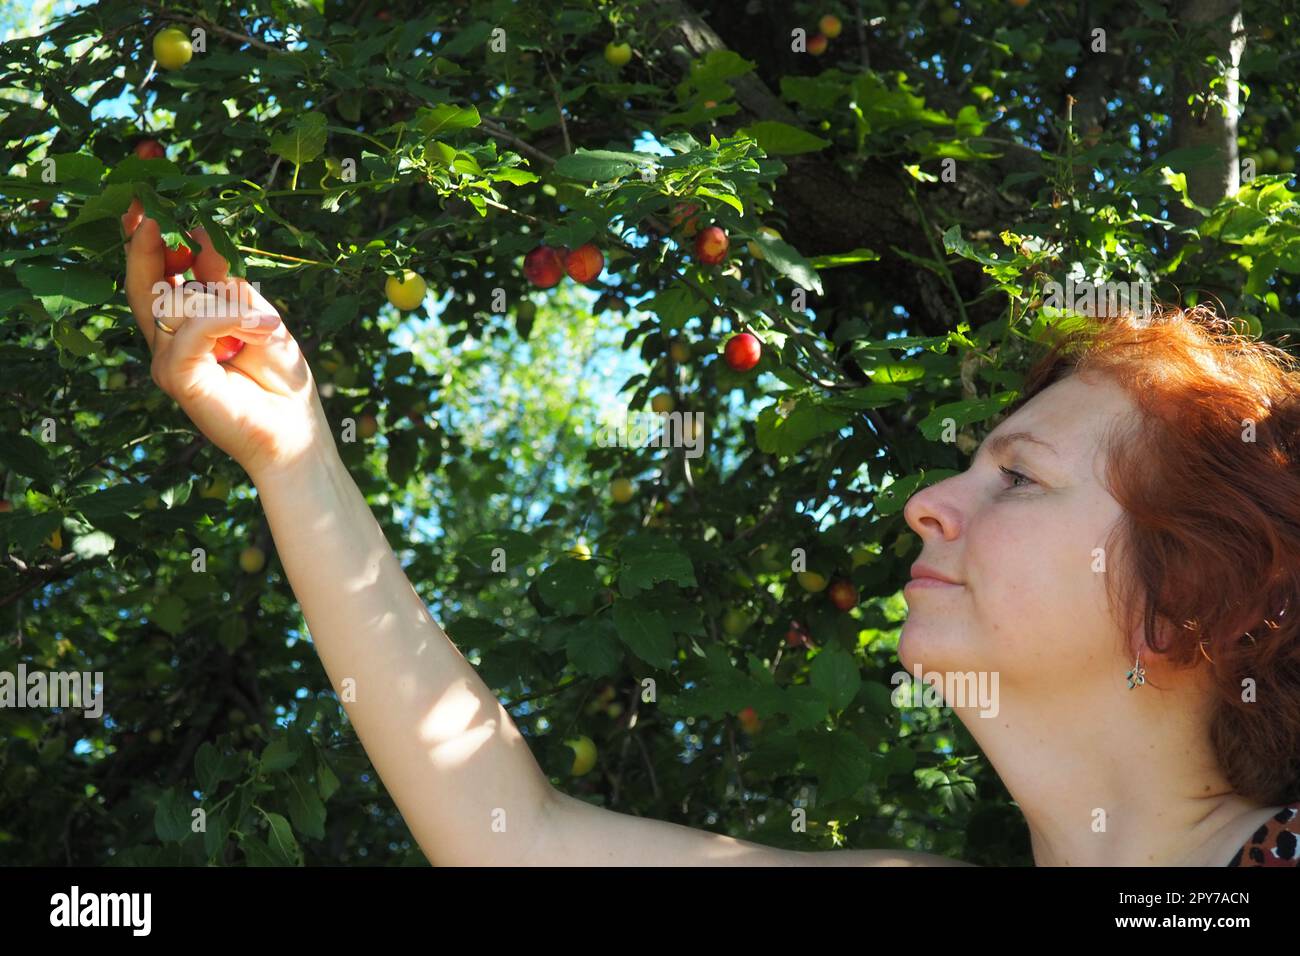 caucasian woman 40 years old collects cherry plum from a tree. Harvest in Serbia. Prunus cerasifera is a species of plum known by the common names cherry plum and myrobalan plum Stock Photo